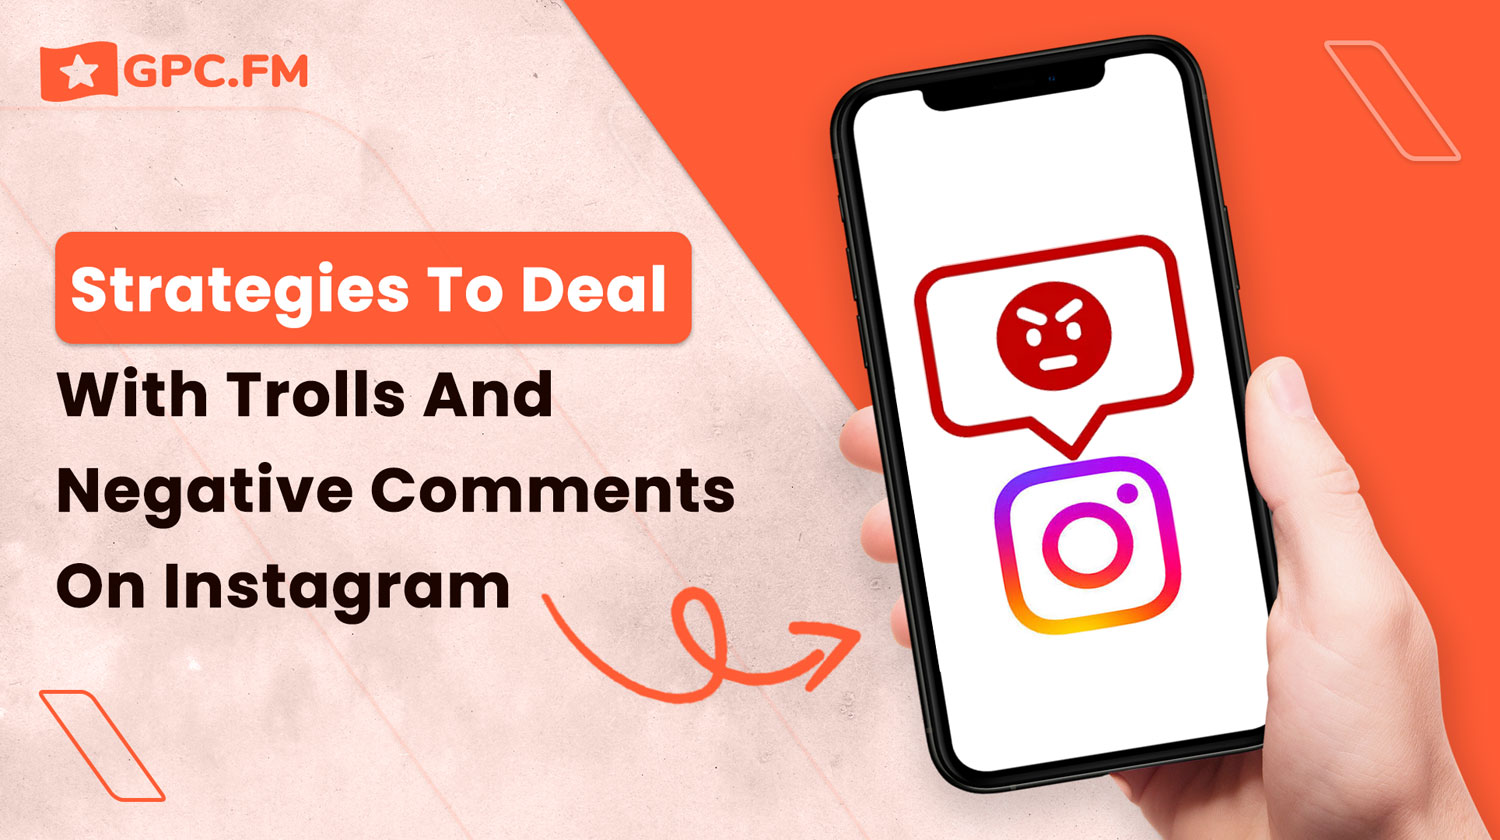 Strategies to Deal with Trolls, Negative Comments on Instagram